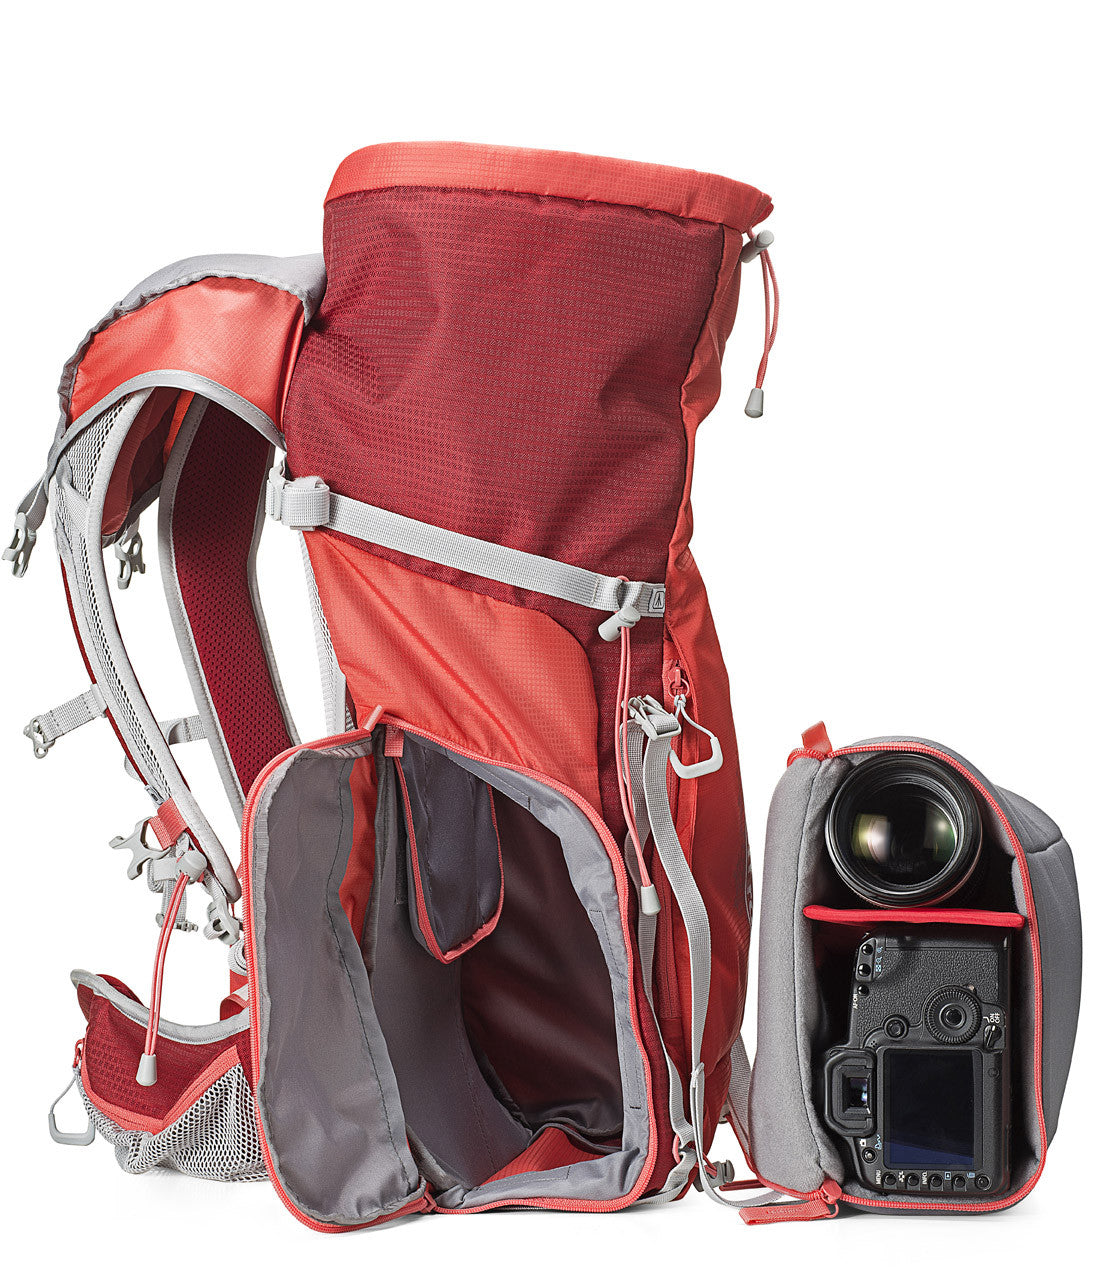 Manfrotto Off Road Hiking Backpack Grey, bags backpacks, Manfrotto - Pictureline  - 5